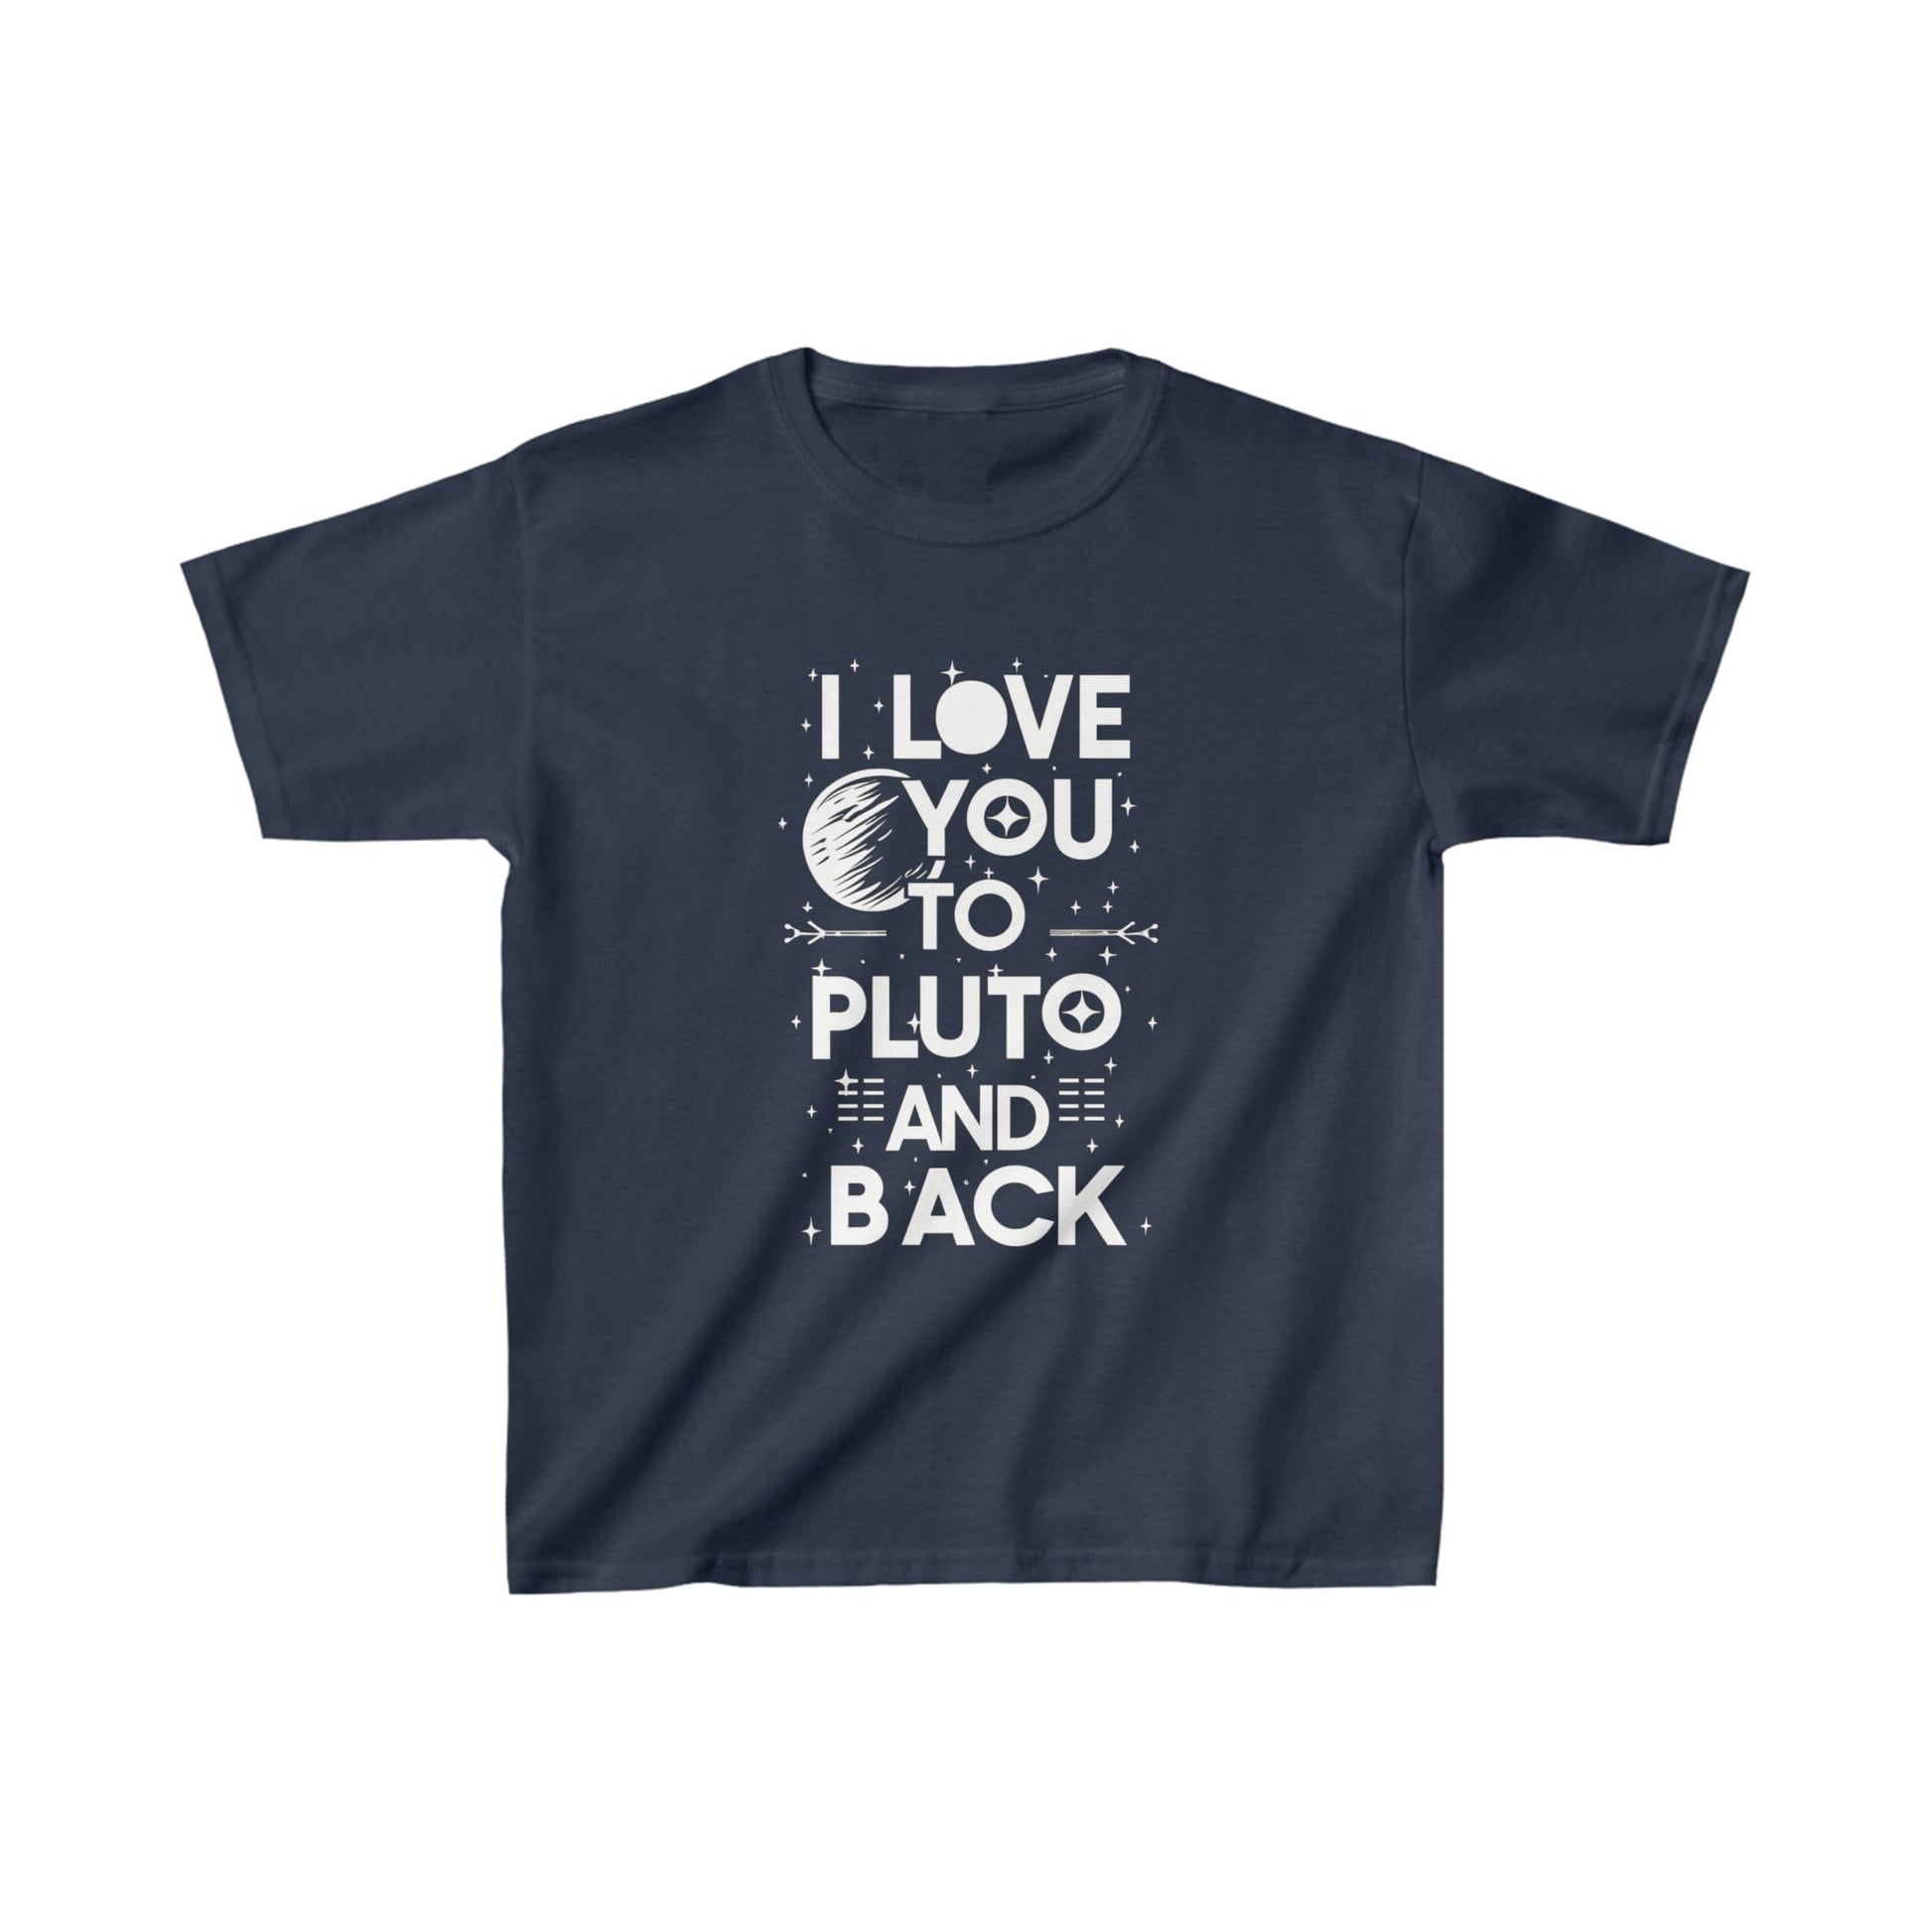 Kids clothes XS / Navy Youth I Love You to Pluto T-Shirt